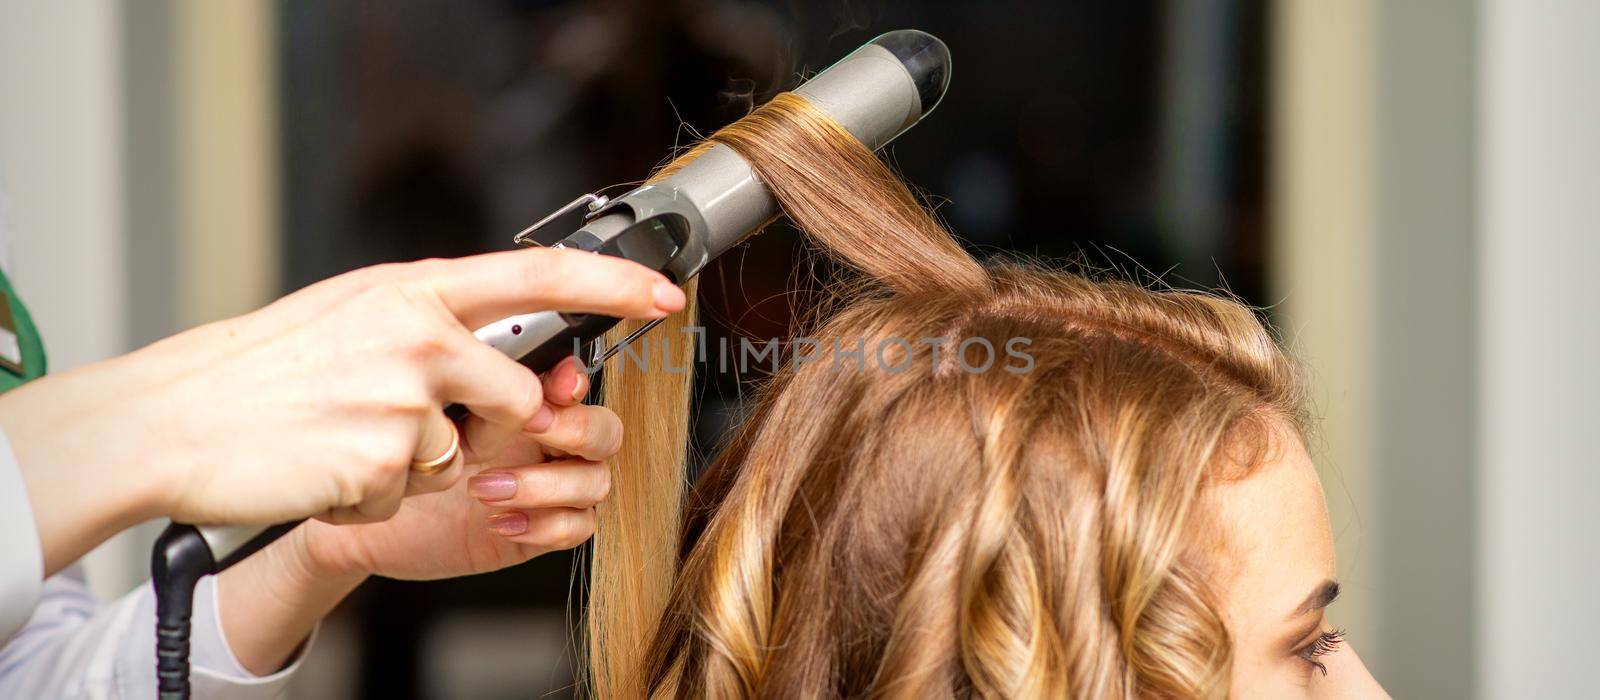 Hairdresser makes curls with a curling iron for the young woman with long brown hair in a beauty salon. by okskukuruza